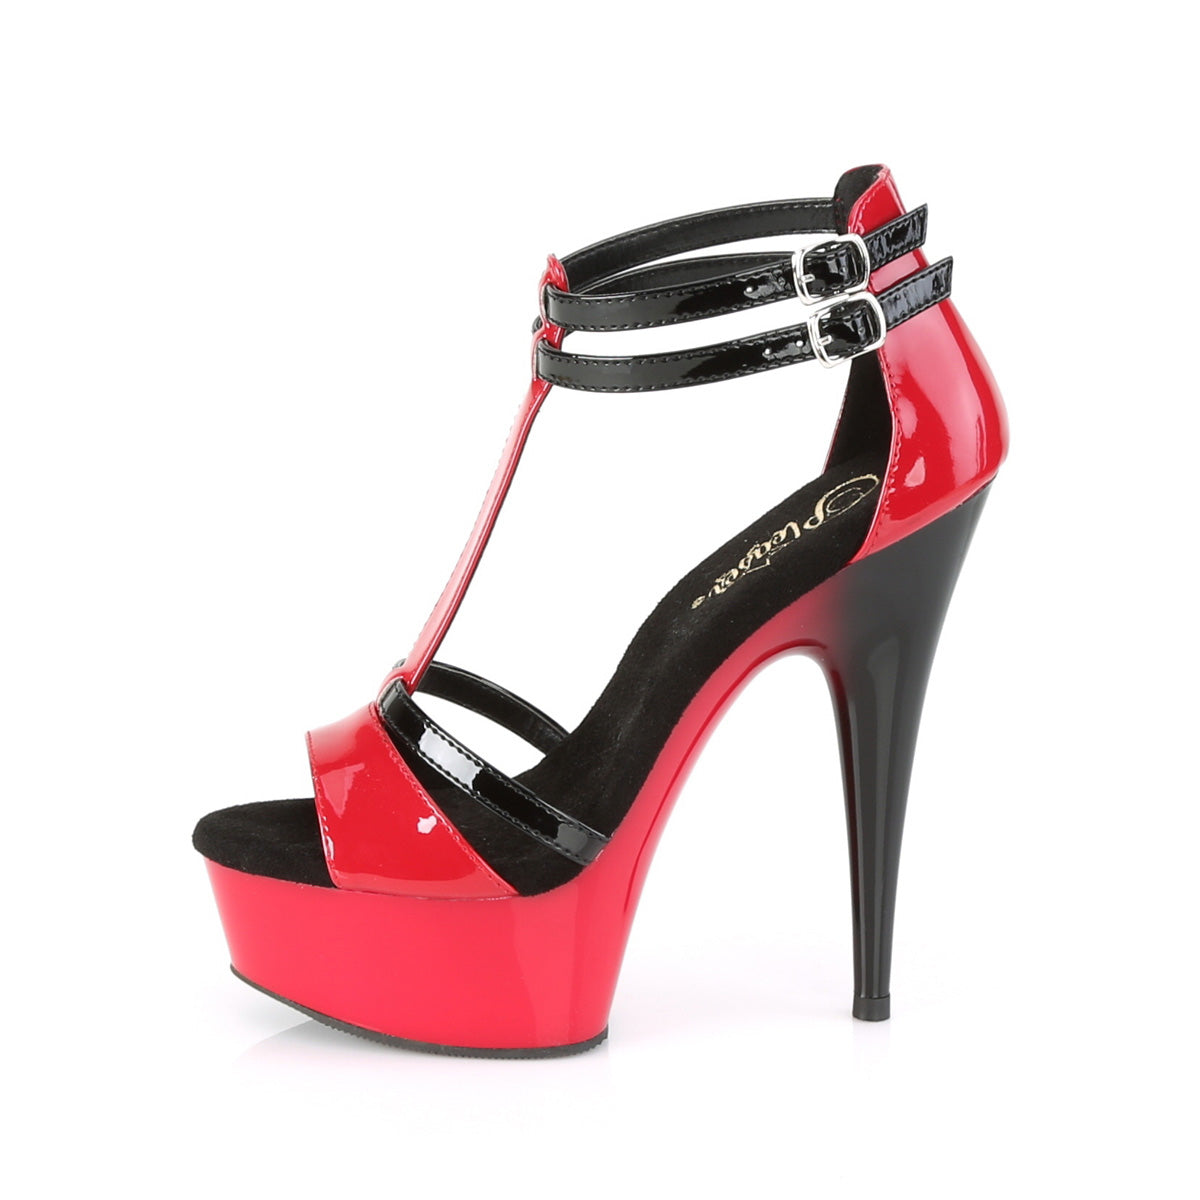 Pleaser Sandalias para mujer DELIGHT-663 Red-Blk Pat / Red-Blk